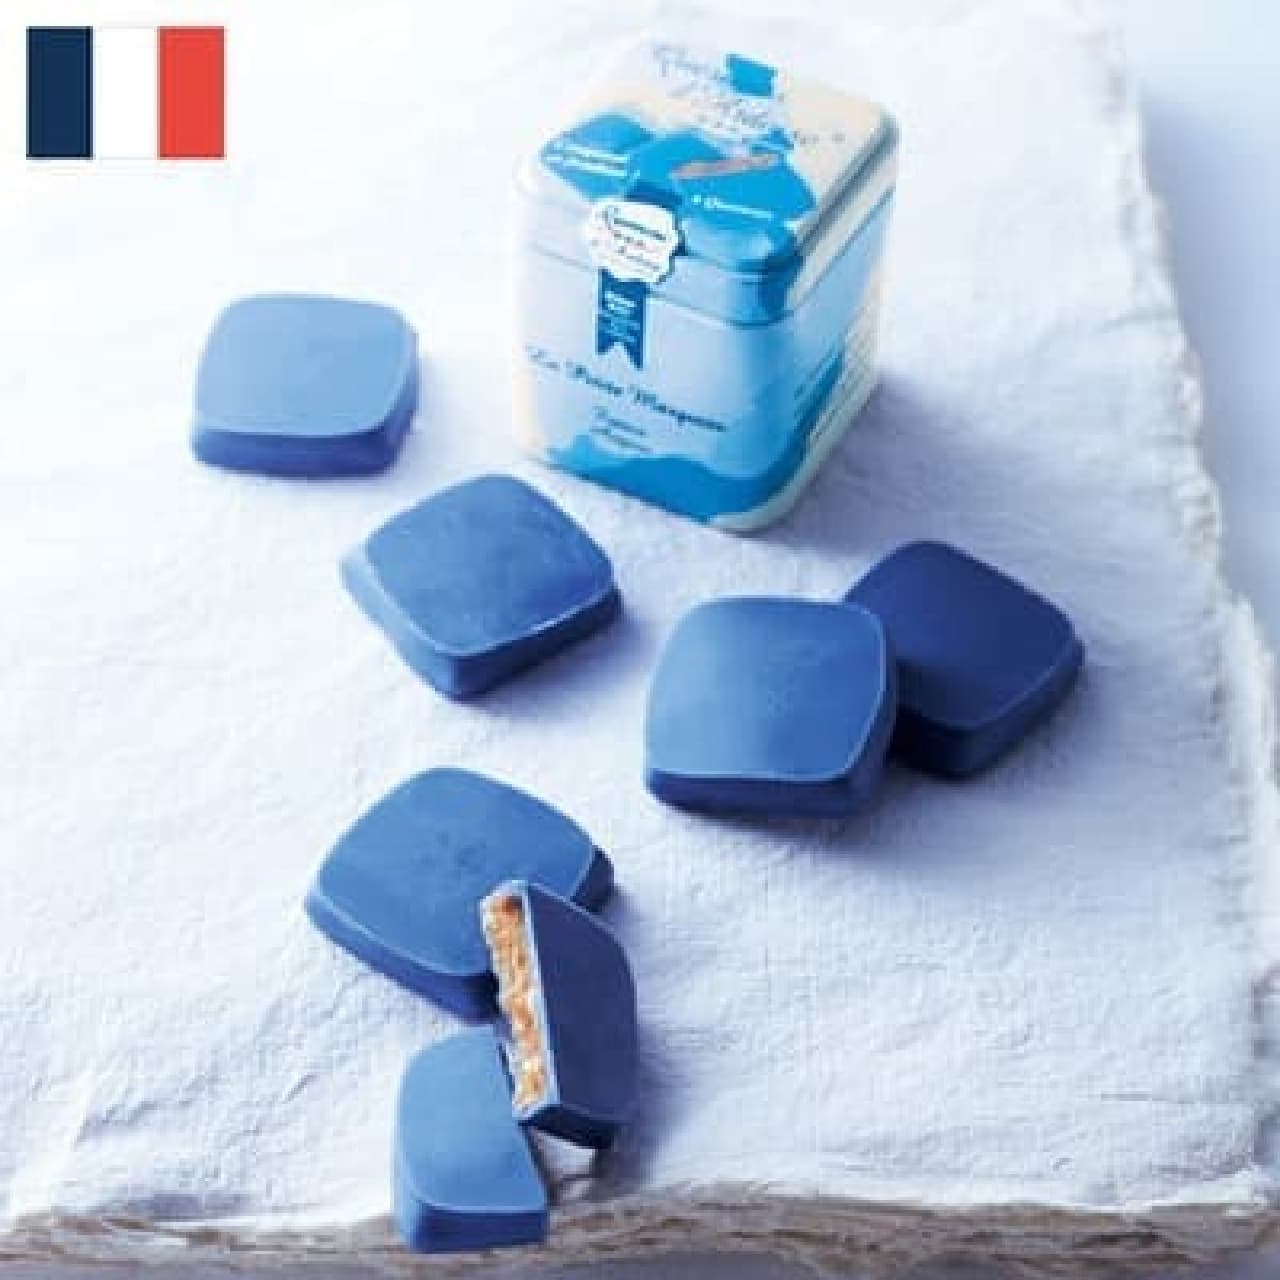 Popular "blue chocolate" at home and abroad